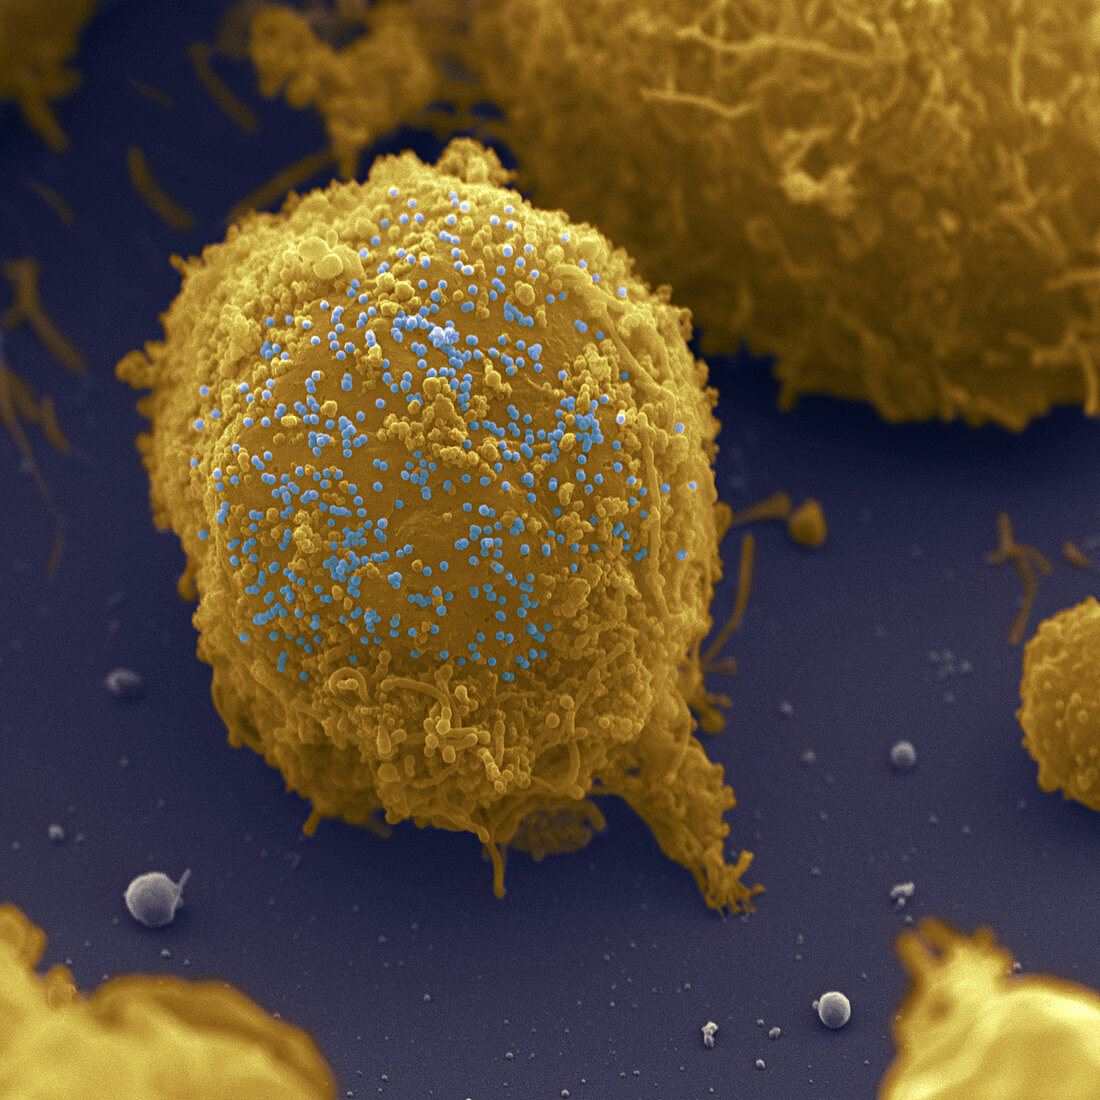 SEM of a T-cell infected with AIDS virus